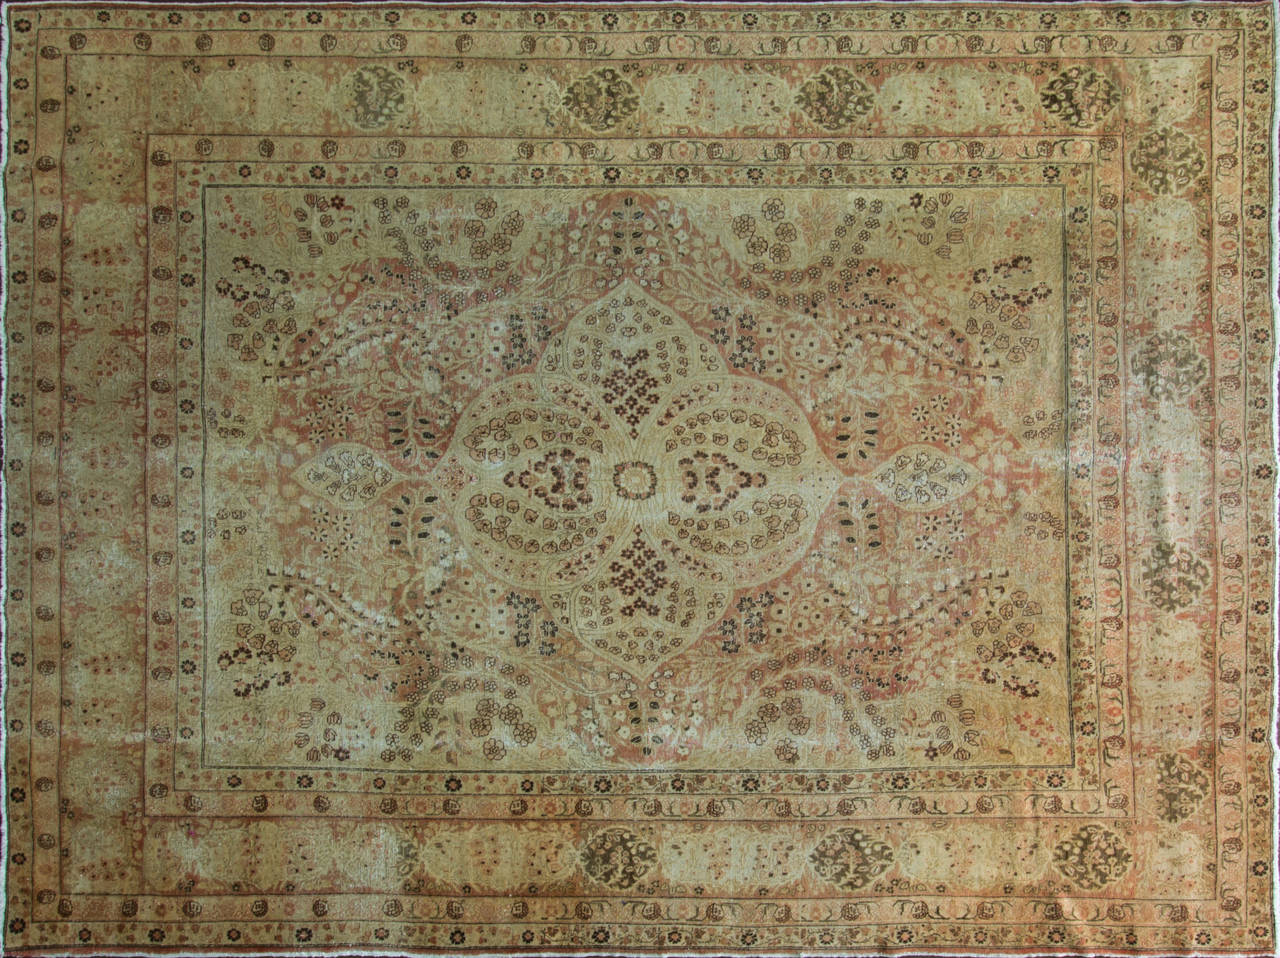 A beautiful antique Tabriz carpet.
The city of Tabriz is situated in North West Persia and it is one of the largest cities and also the capital in the province of Azerbaijan and was the earliest capital of the Safavid dynasty, and it can claim to